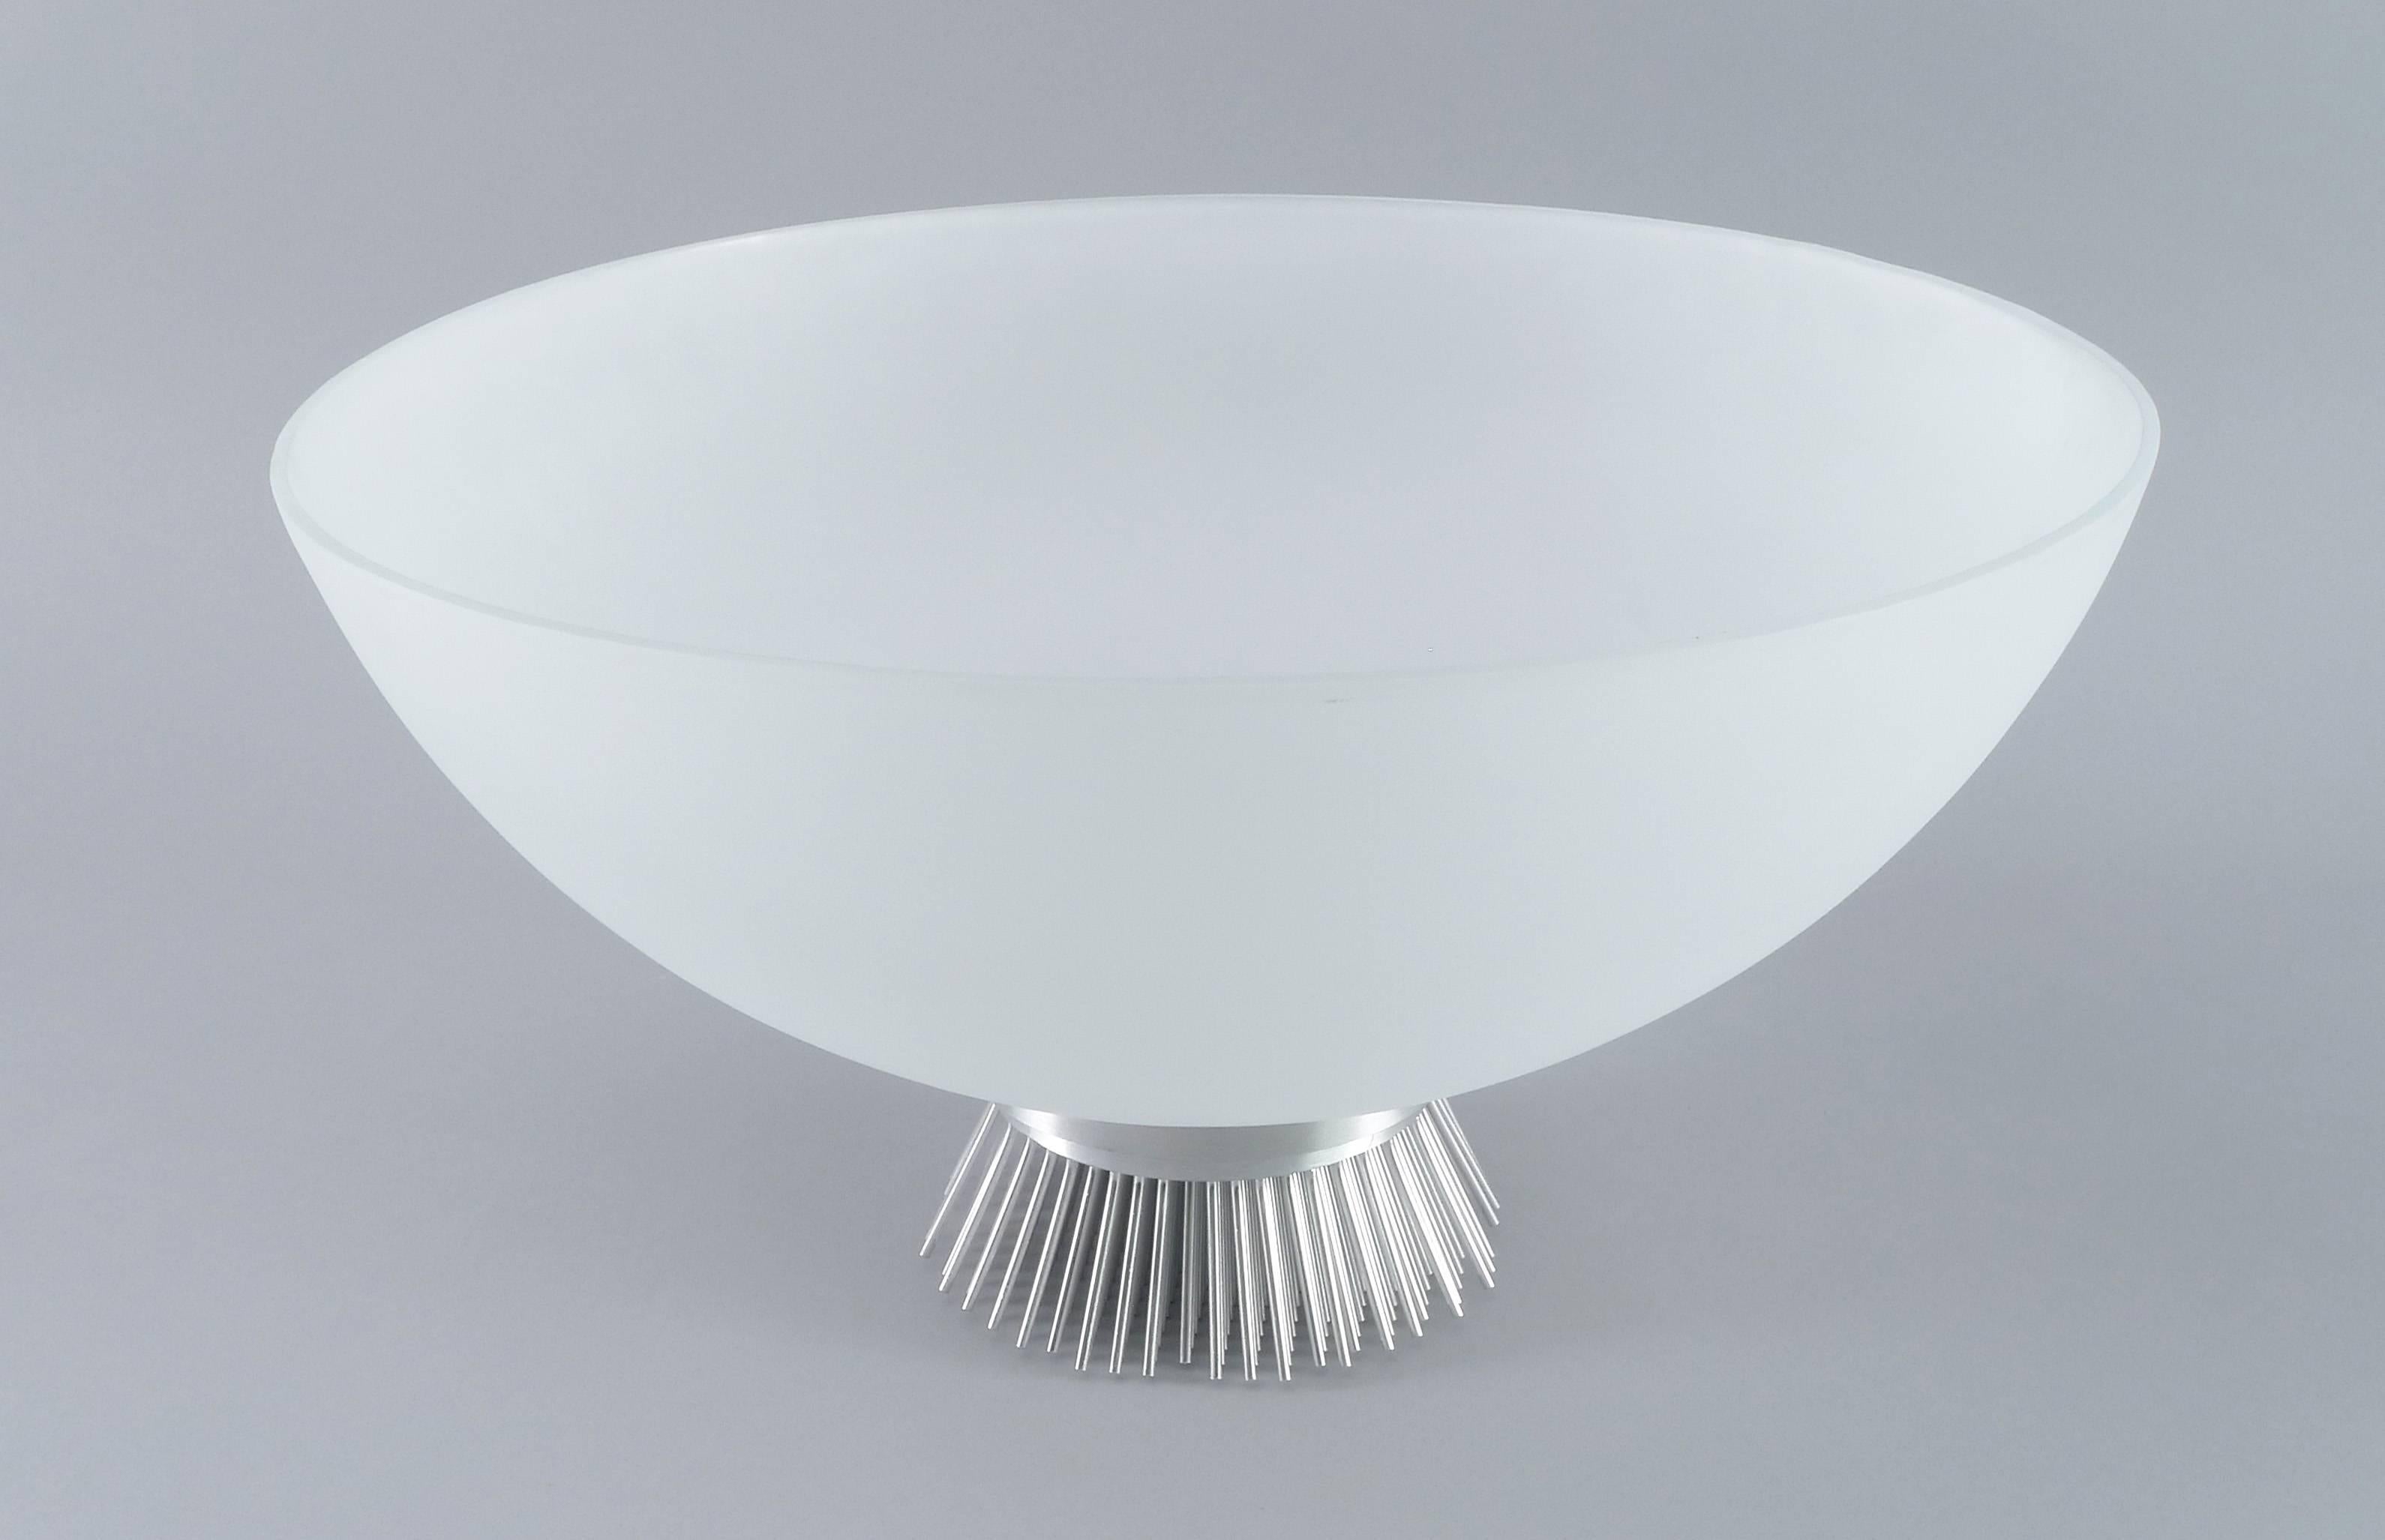 Large bowl centerpiece with spiked aluminum base, center glass bowl is frosted outside. In the style of Bertoria.